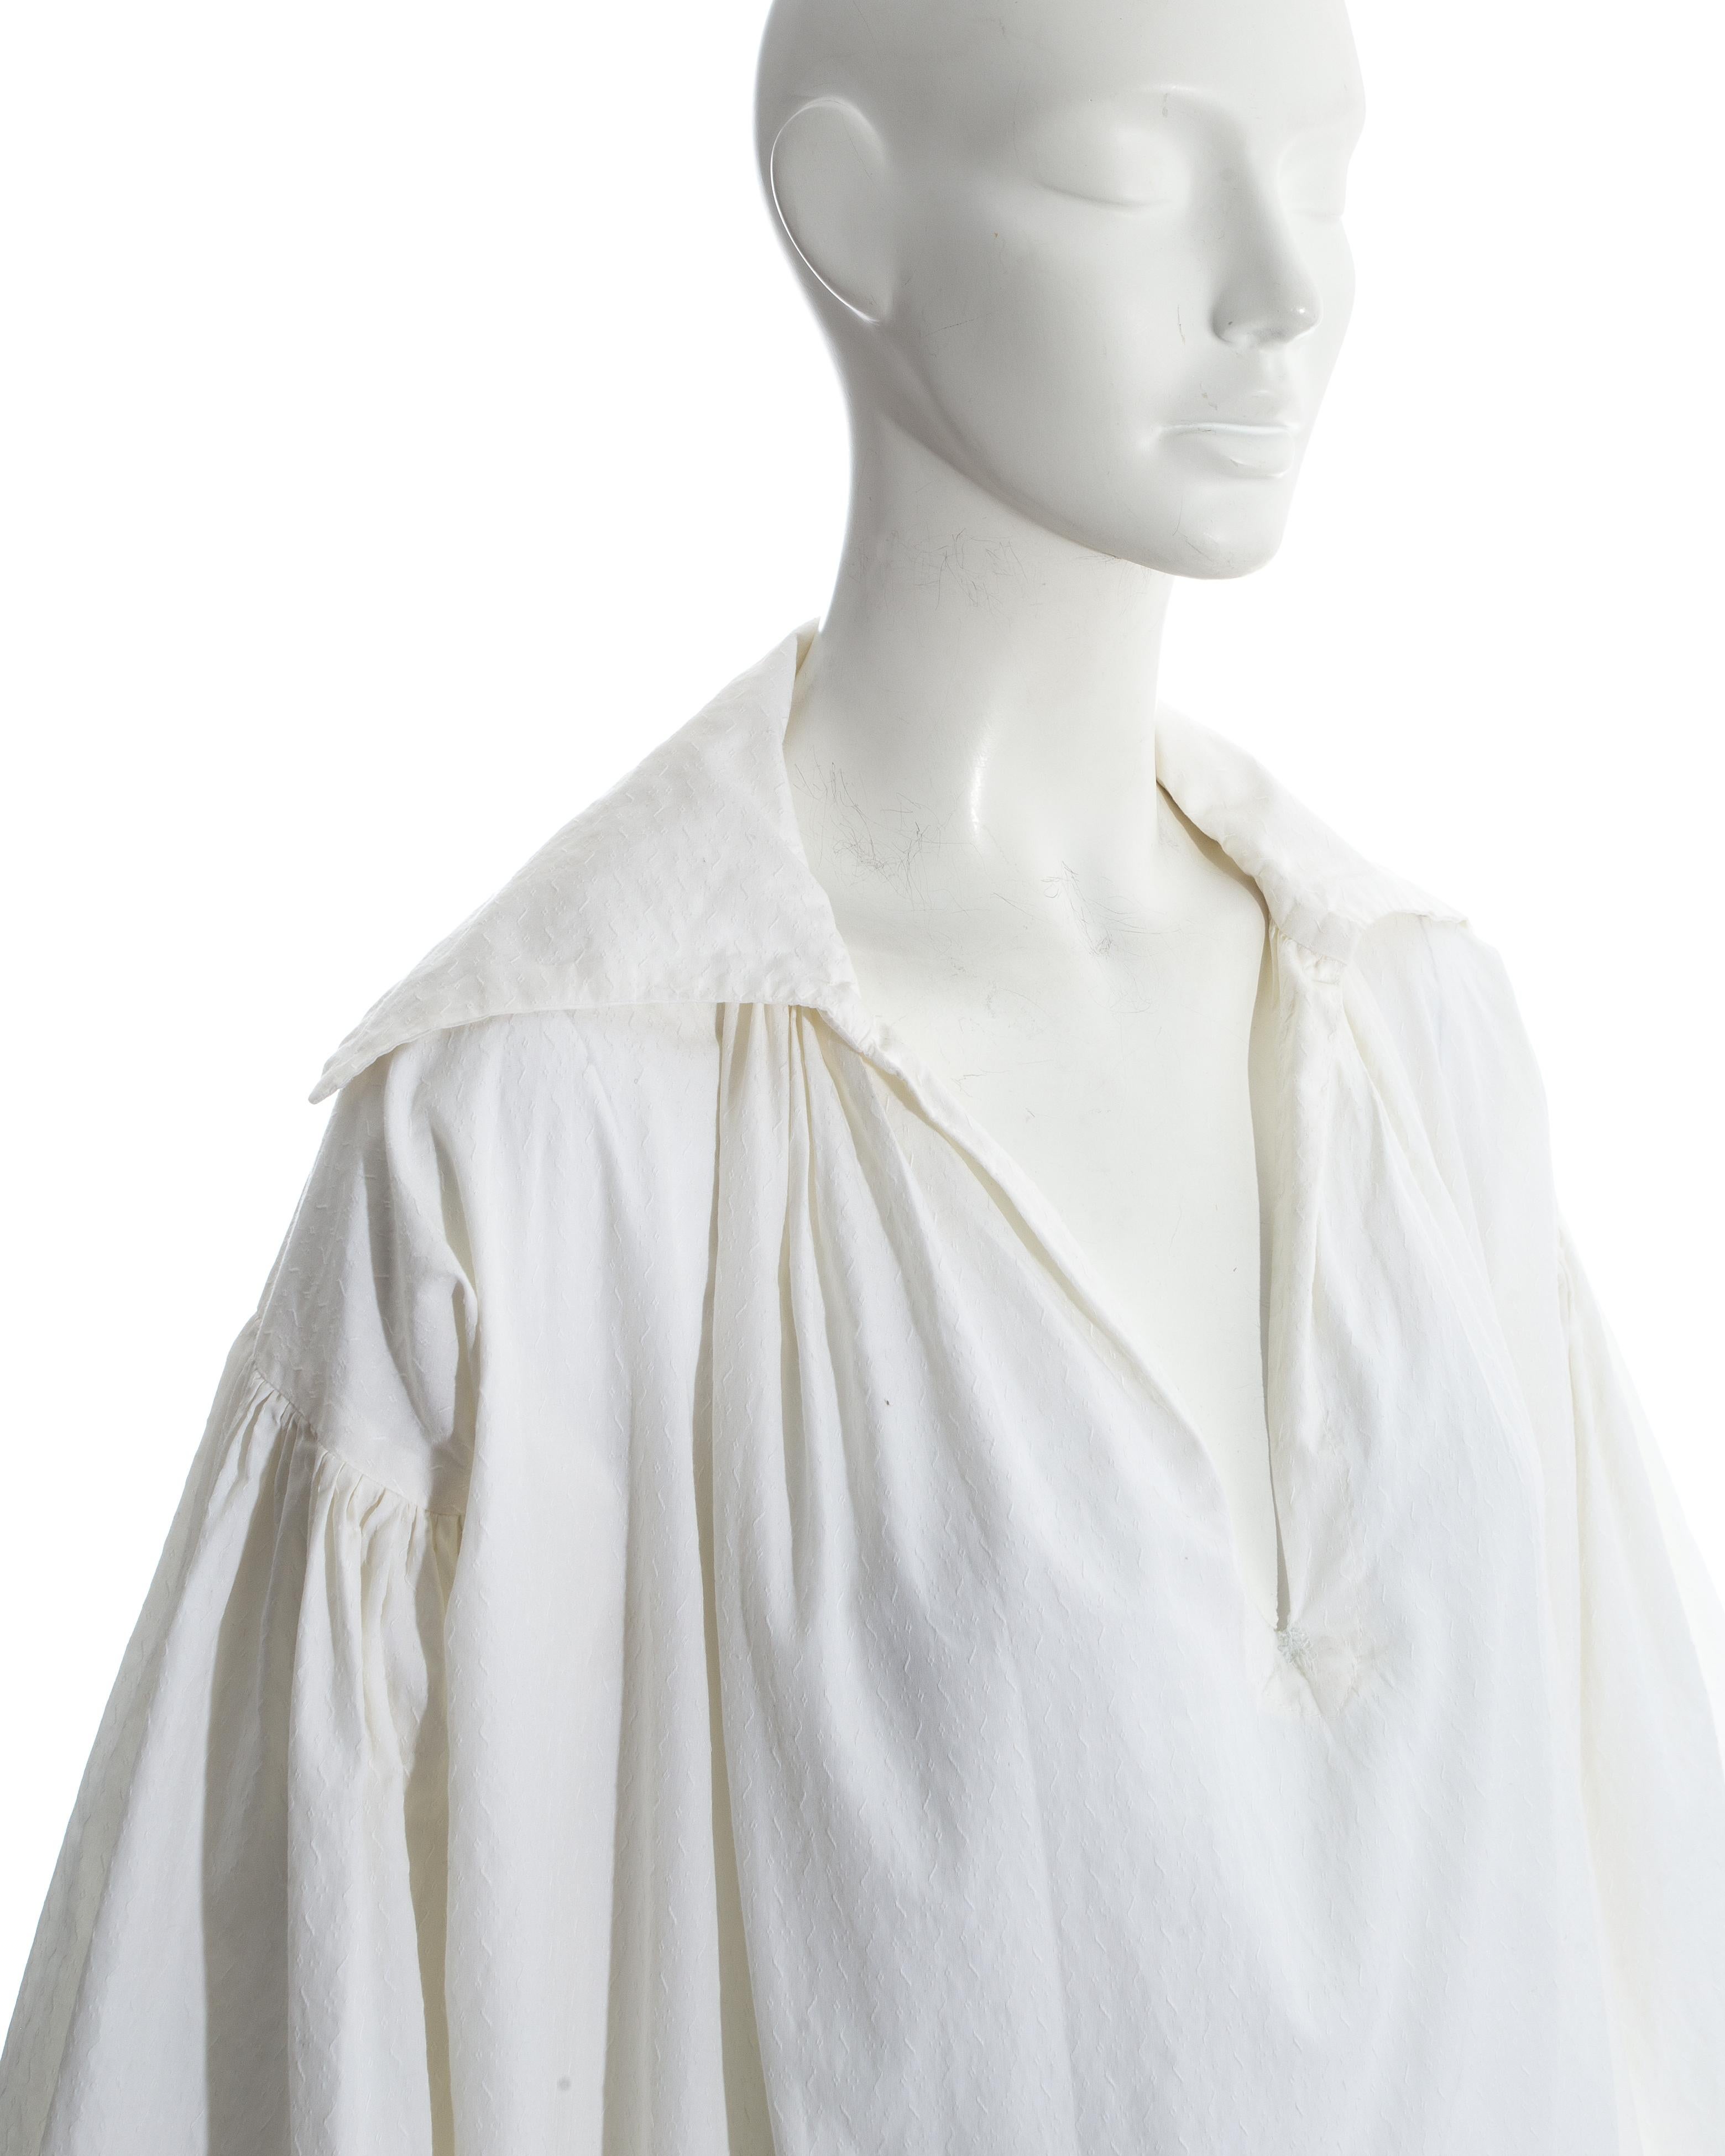 Worlds End 'Pirates' white cotton jacquard oversized blouse, fw 1981 In Good Condition For Sale In London, London